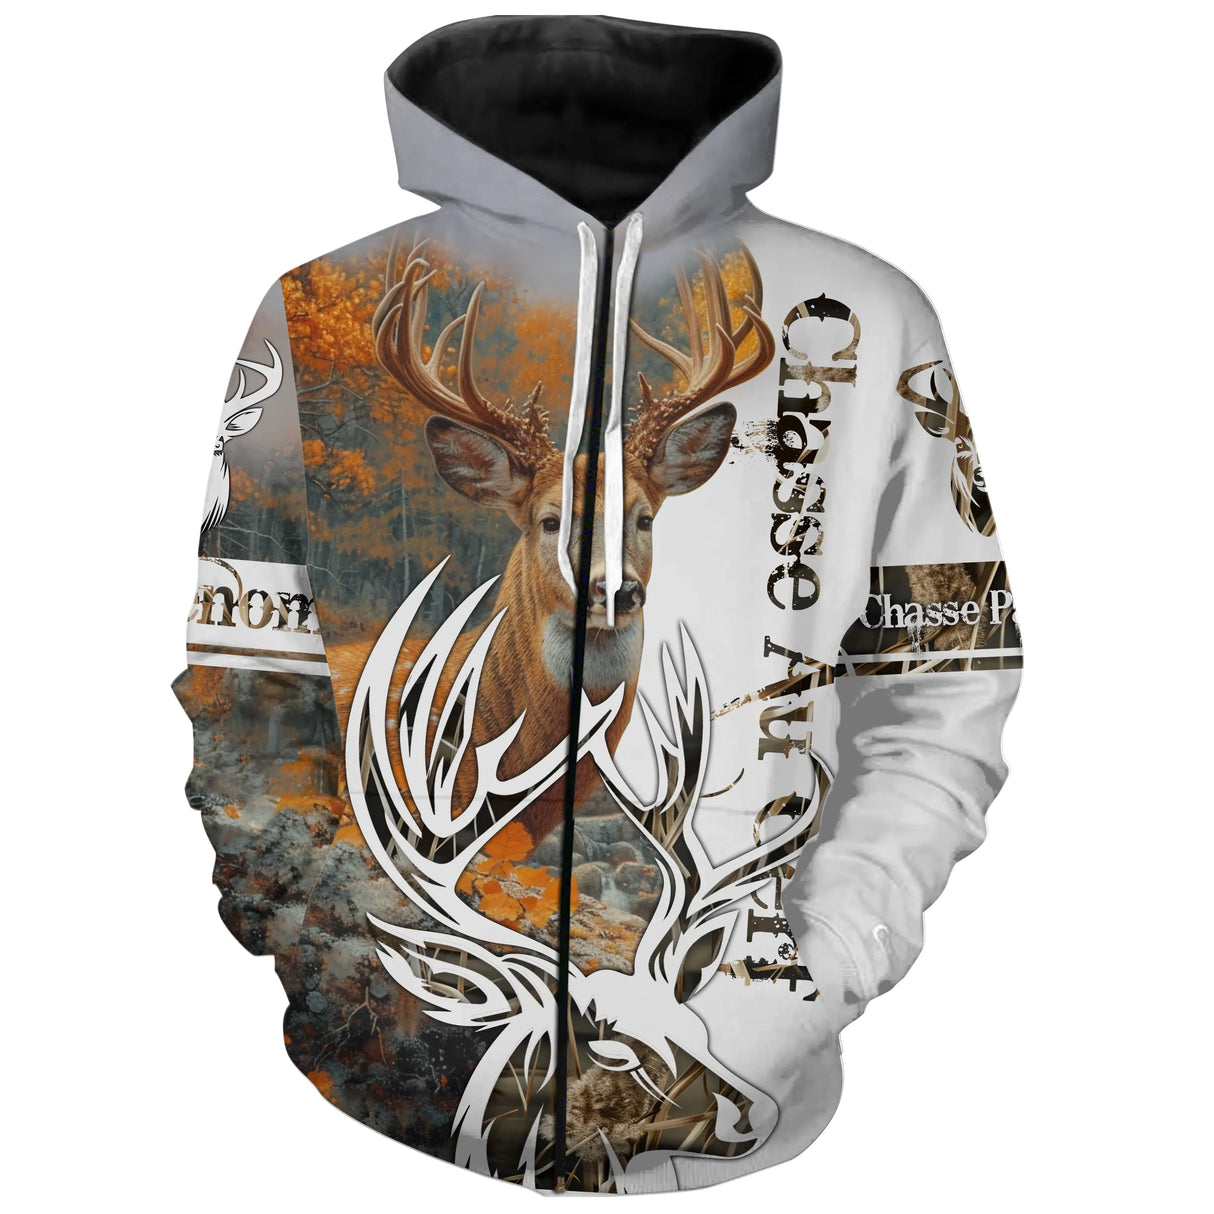 T-shirt, Sweat Chasse Au Cerf, Cadeau Personnaliser Chasseur, Camouflage Chasse Passion - CT09112219 Sweat Zippé All Over Unisexe